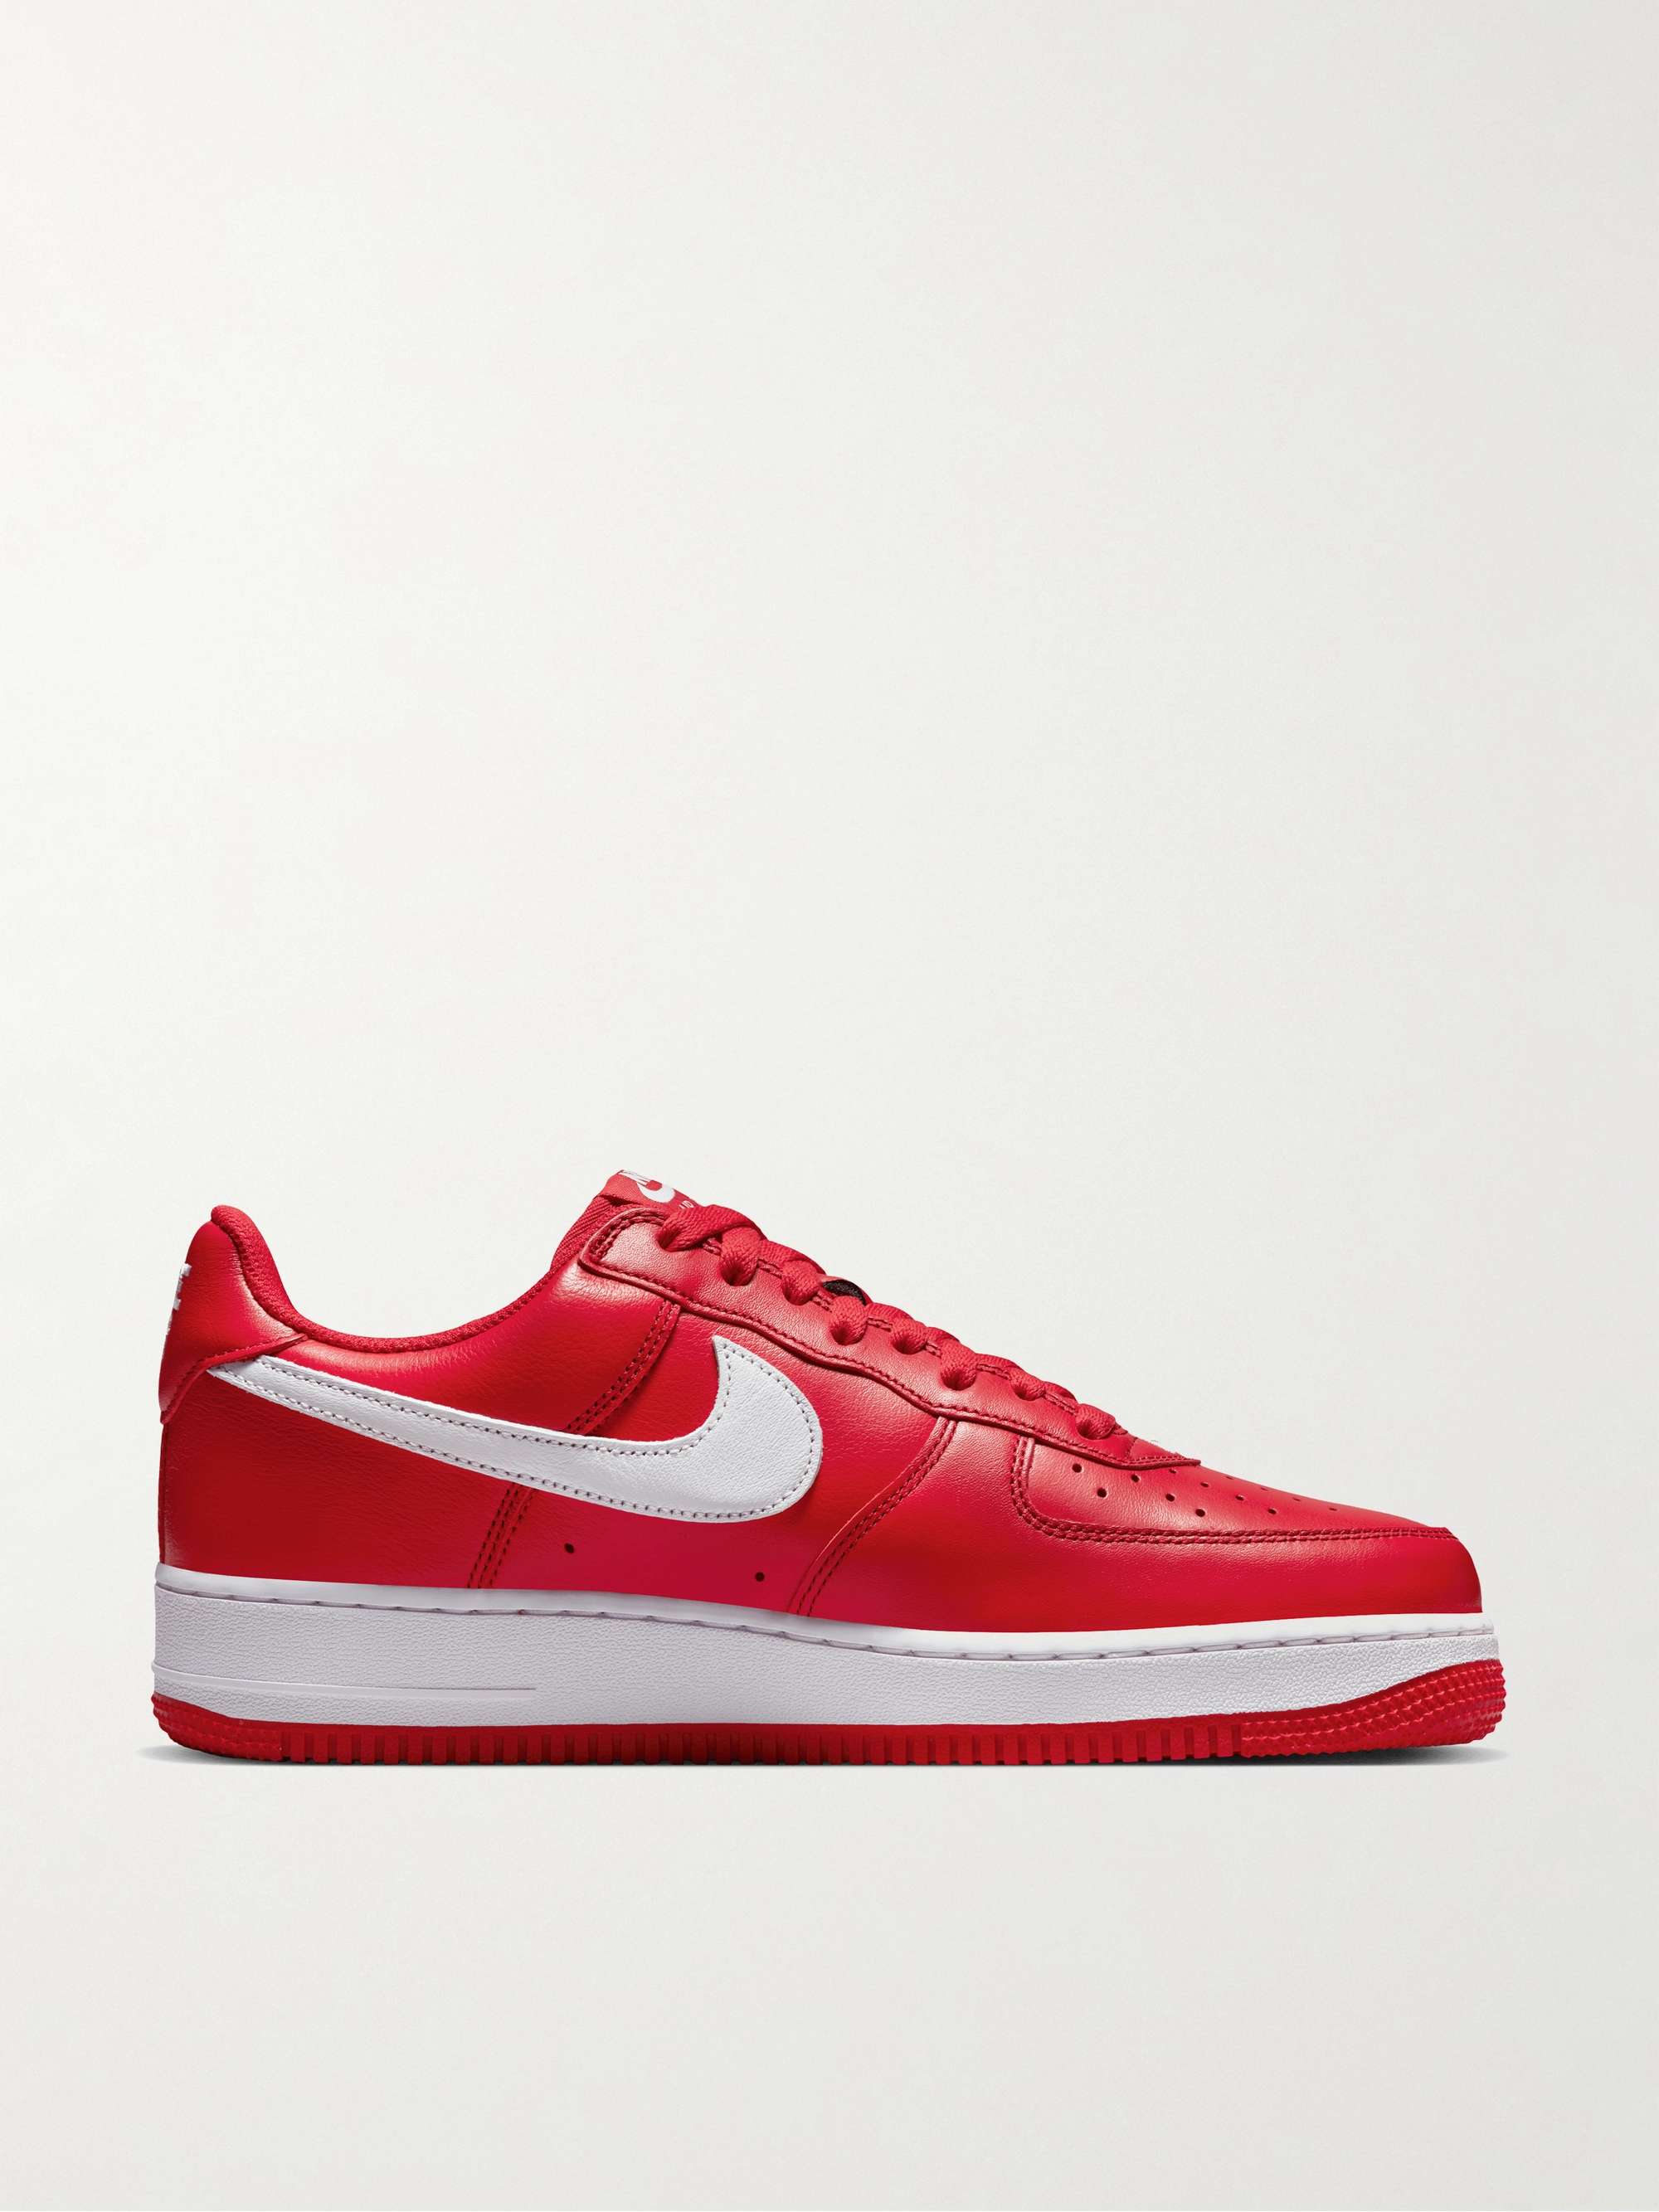 NIKE Air Force 1 Low Retro QS Leather Sneakers